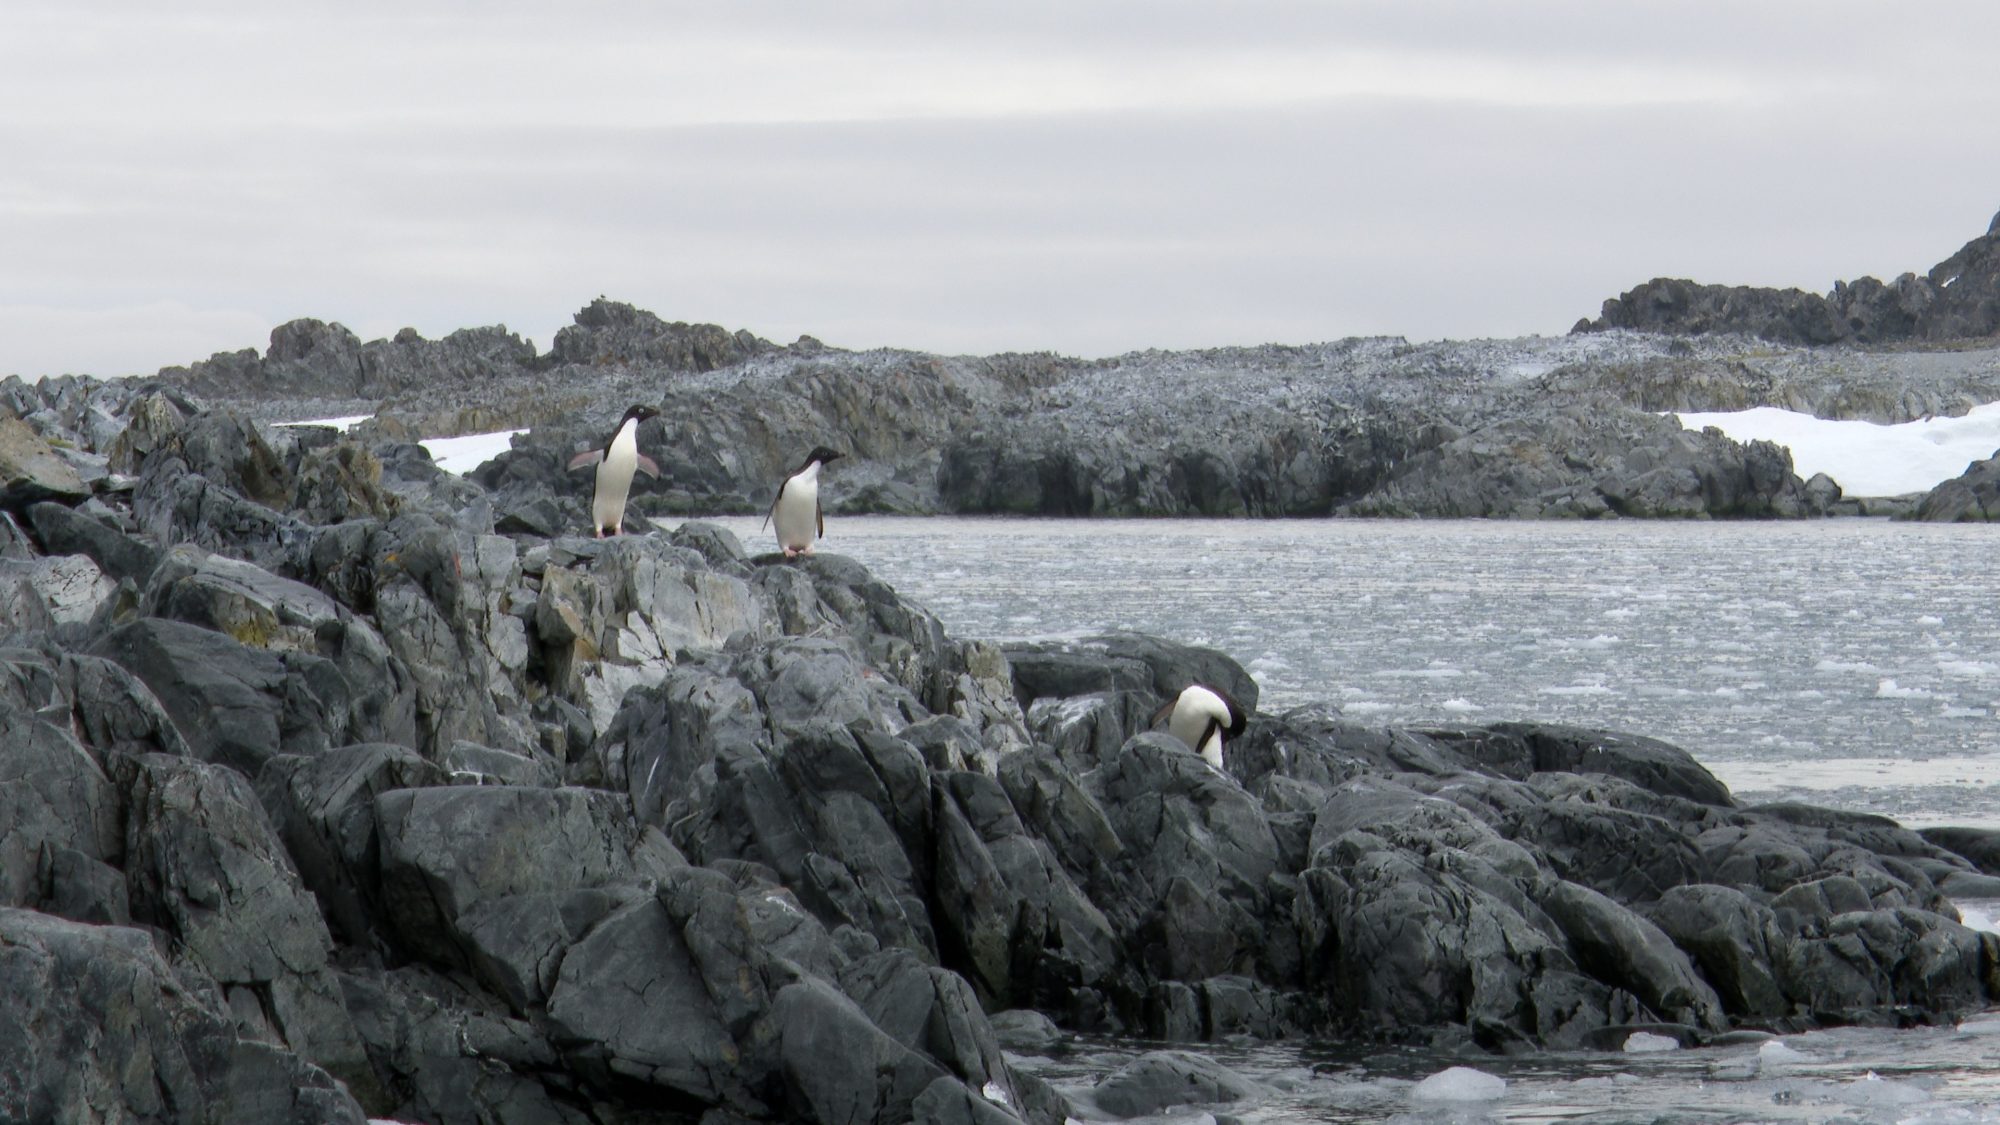 Adelie penguins by the icy sea – Antarctica, 2020